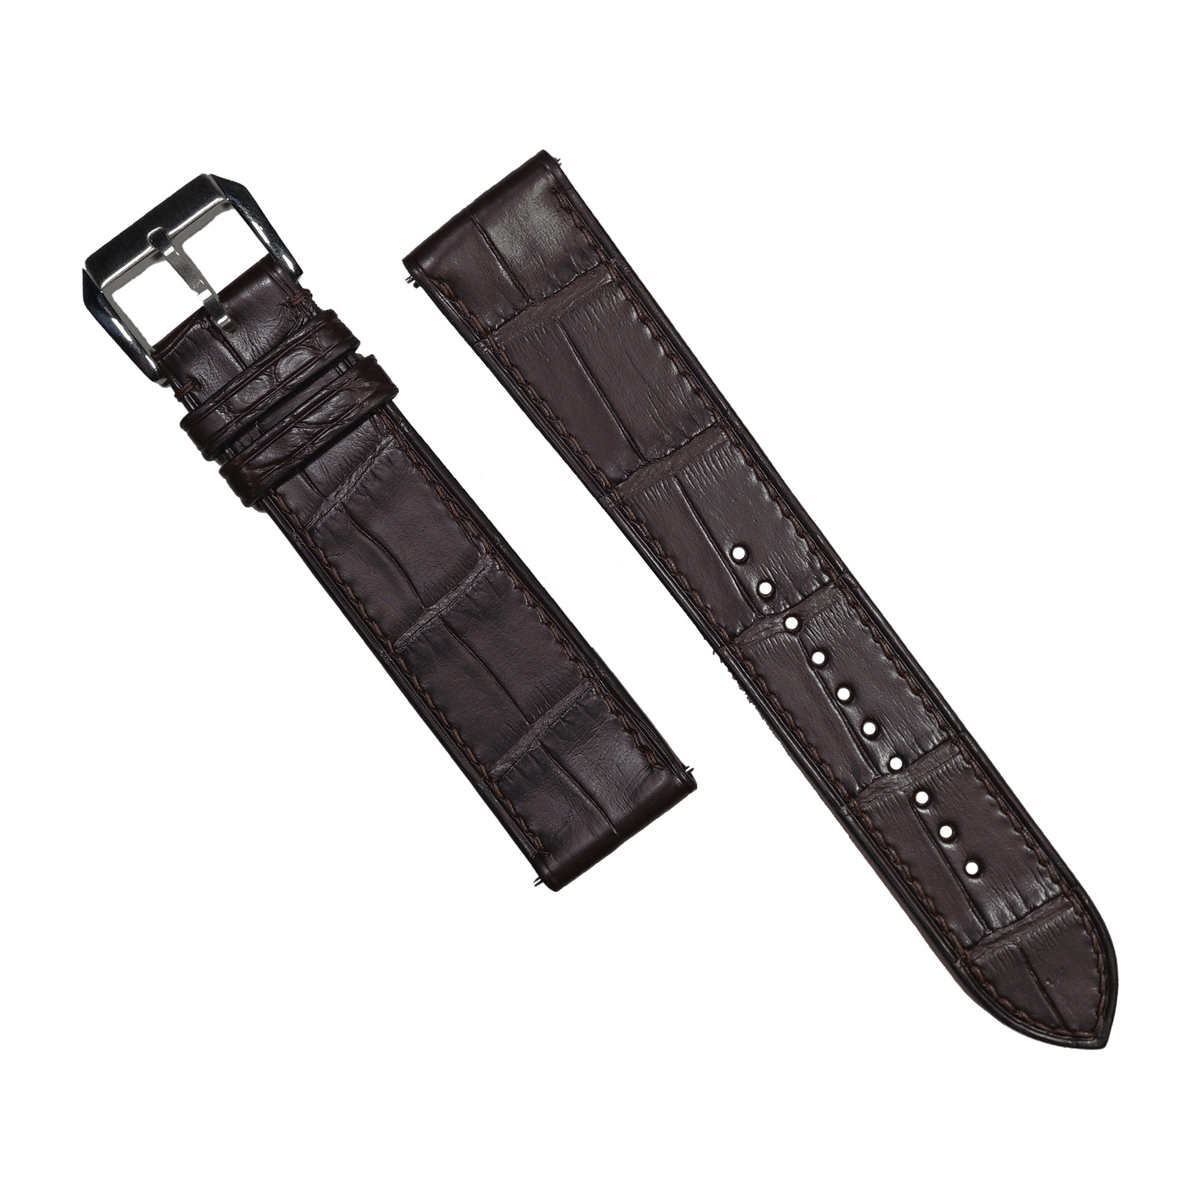 Alligator Leather Watch Strap in Brown (Non-Glossy) - Nomad Watch Works MY